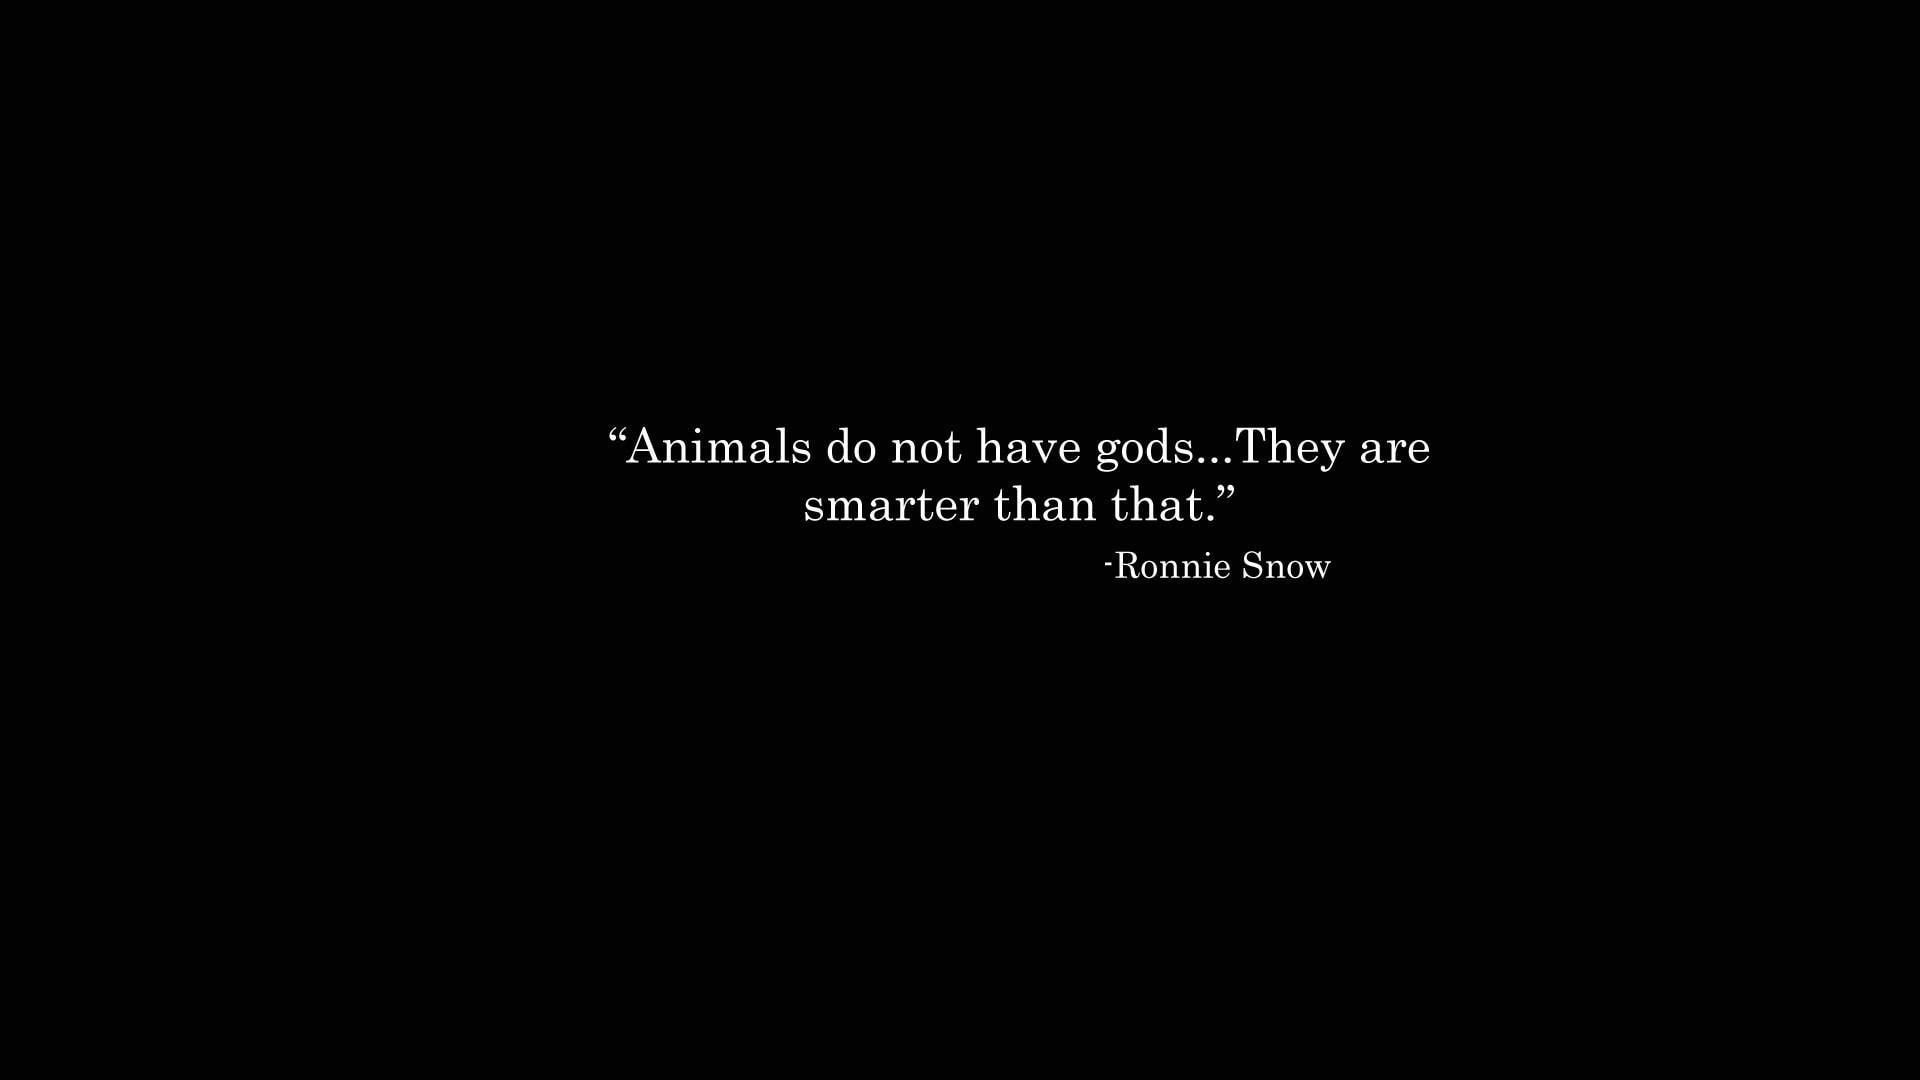 Animals do not have gods, animals do not have gods. they are smarter than that quote